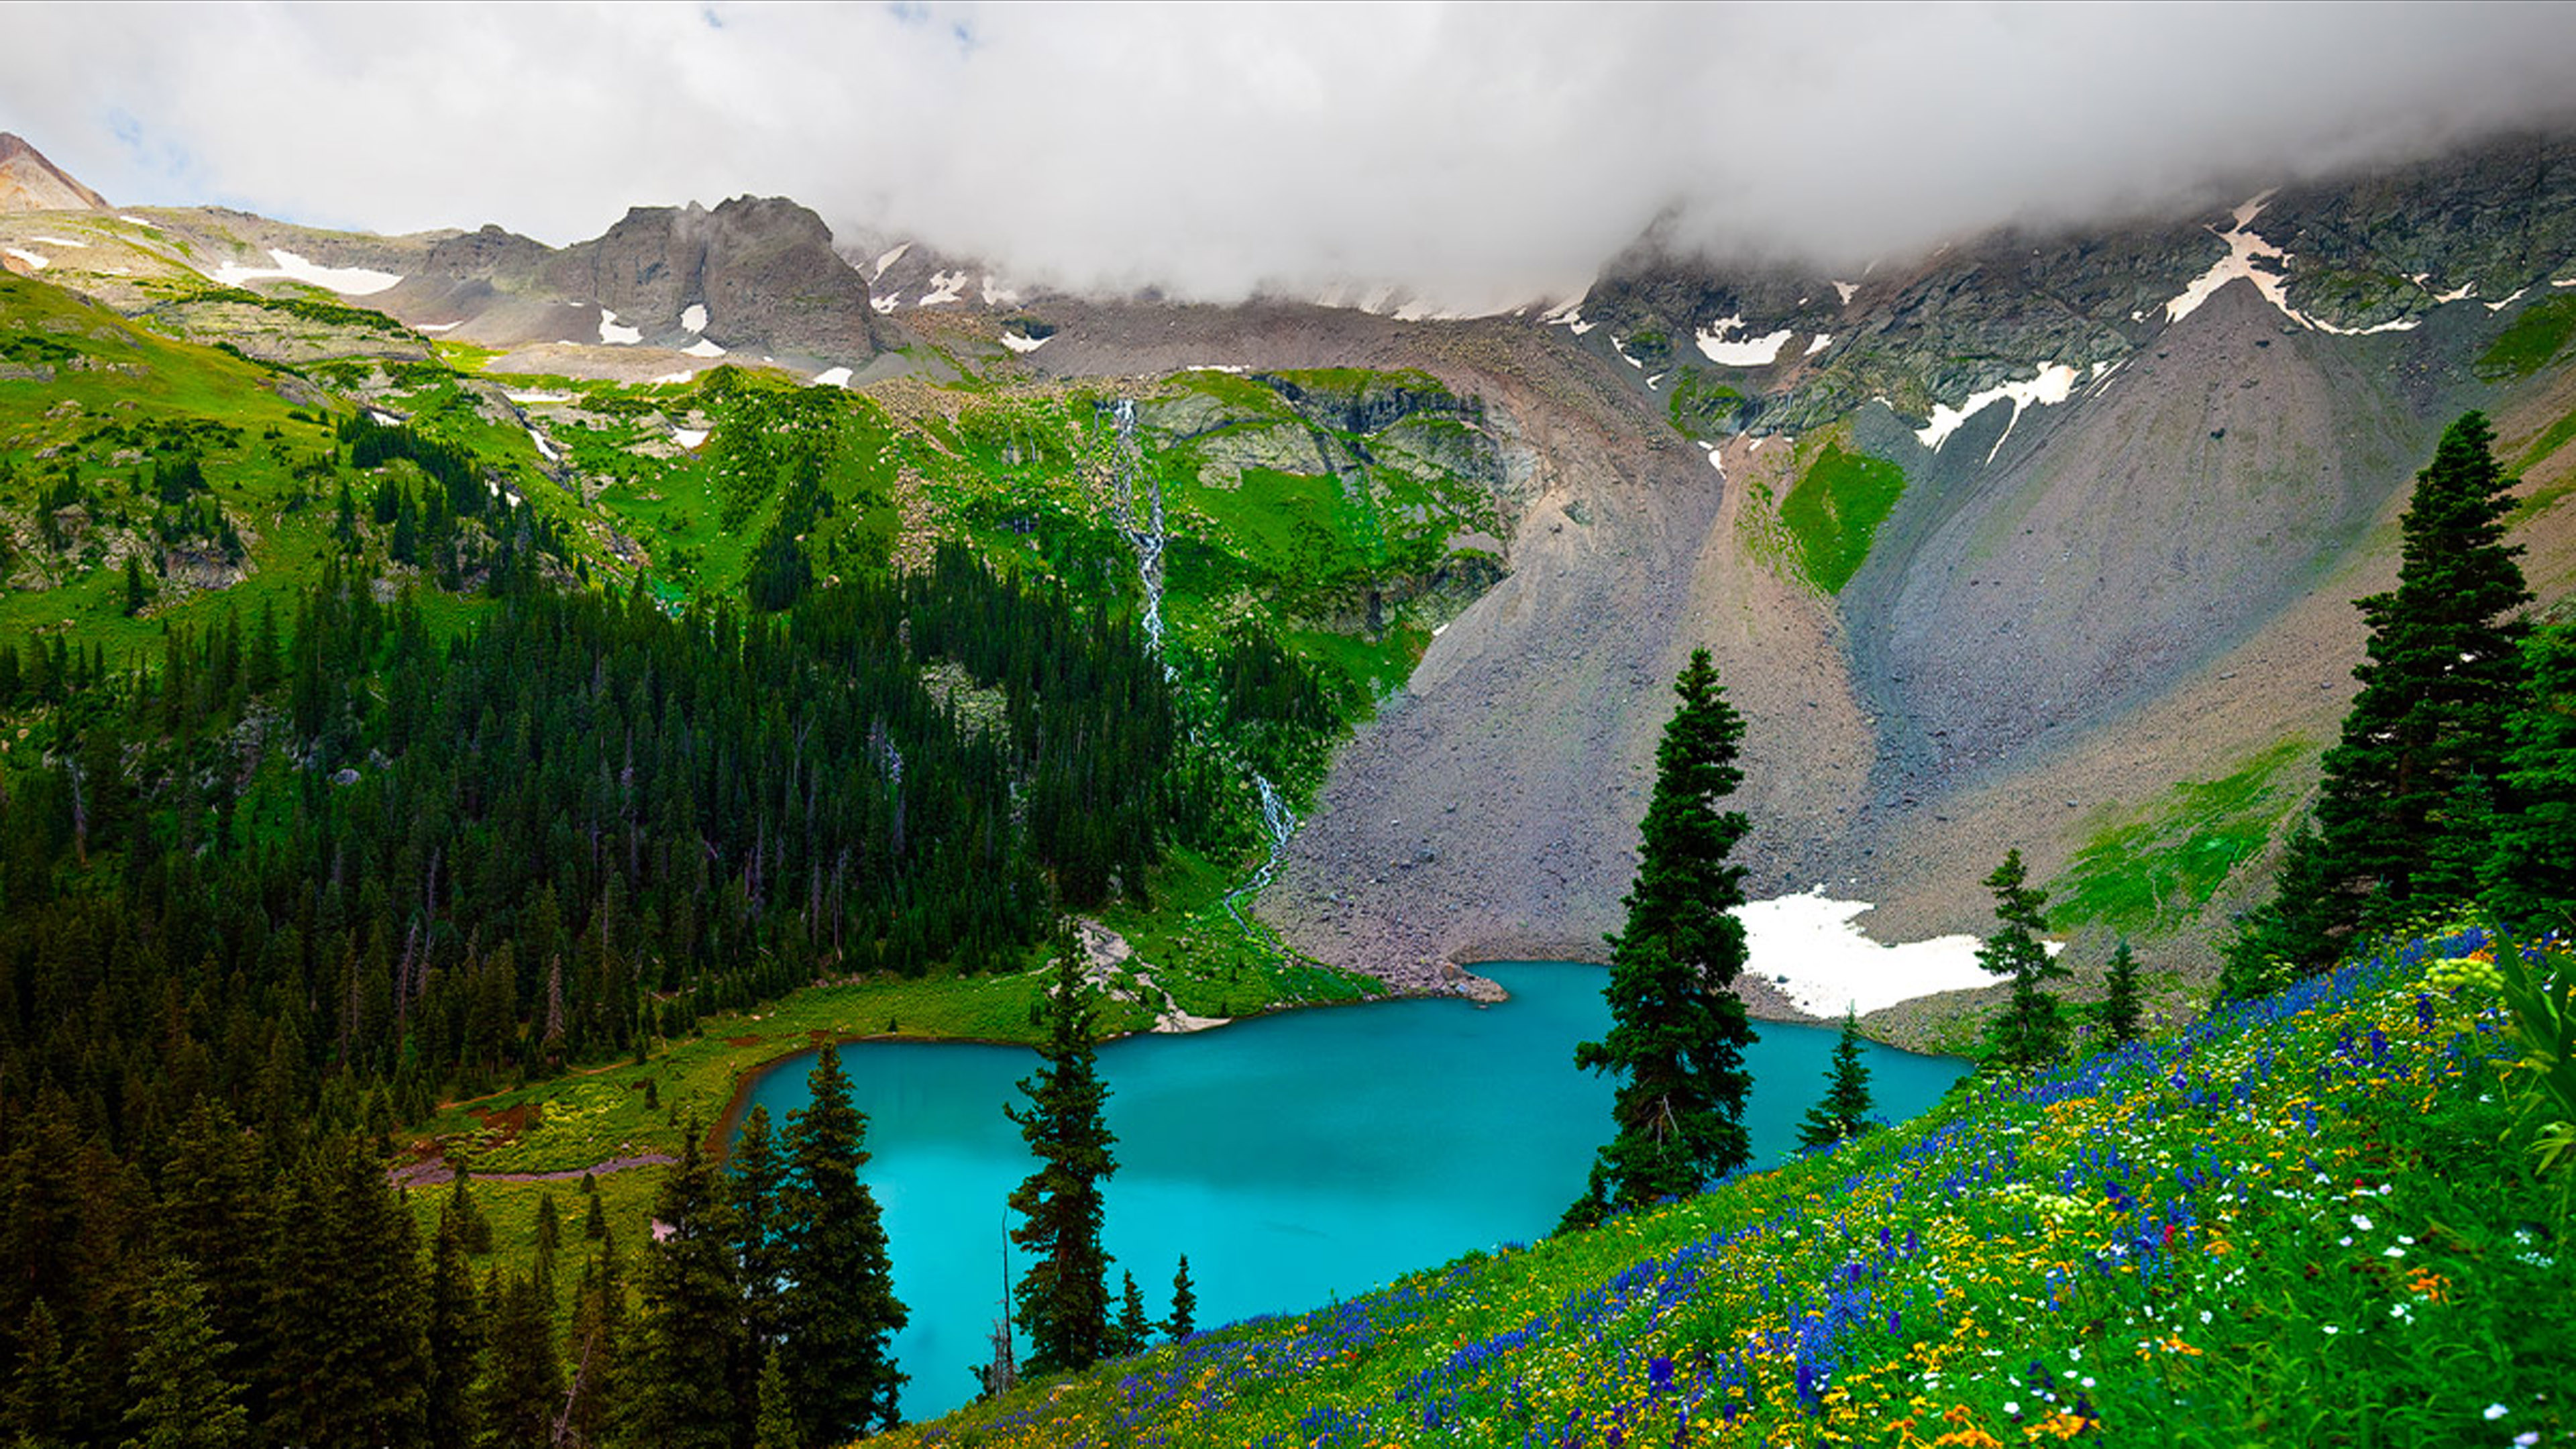 Spring Mountain Landscape, The Turquoise Lake Mountain Forest Flowers